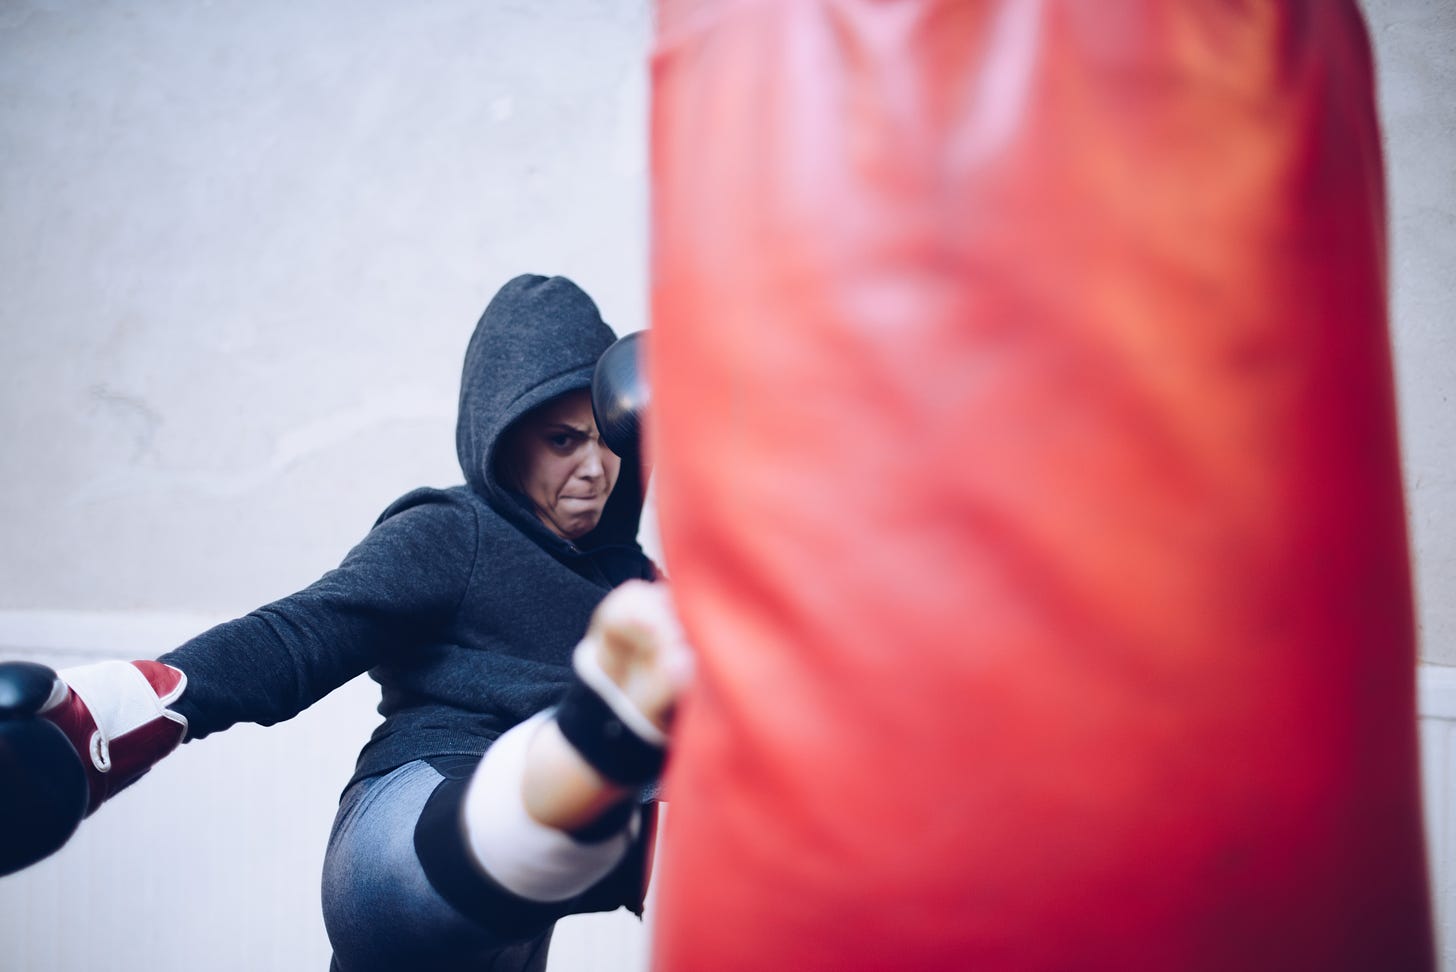 Woman fighter kicking a heavy bag